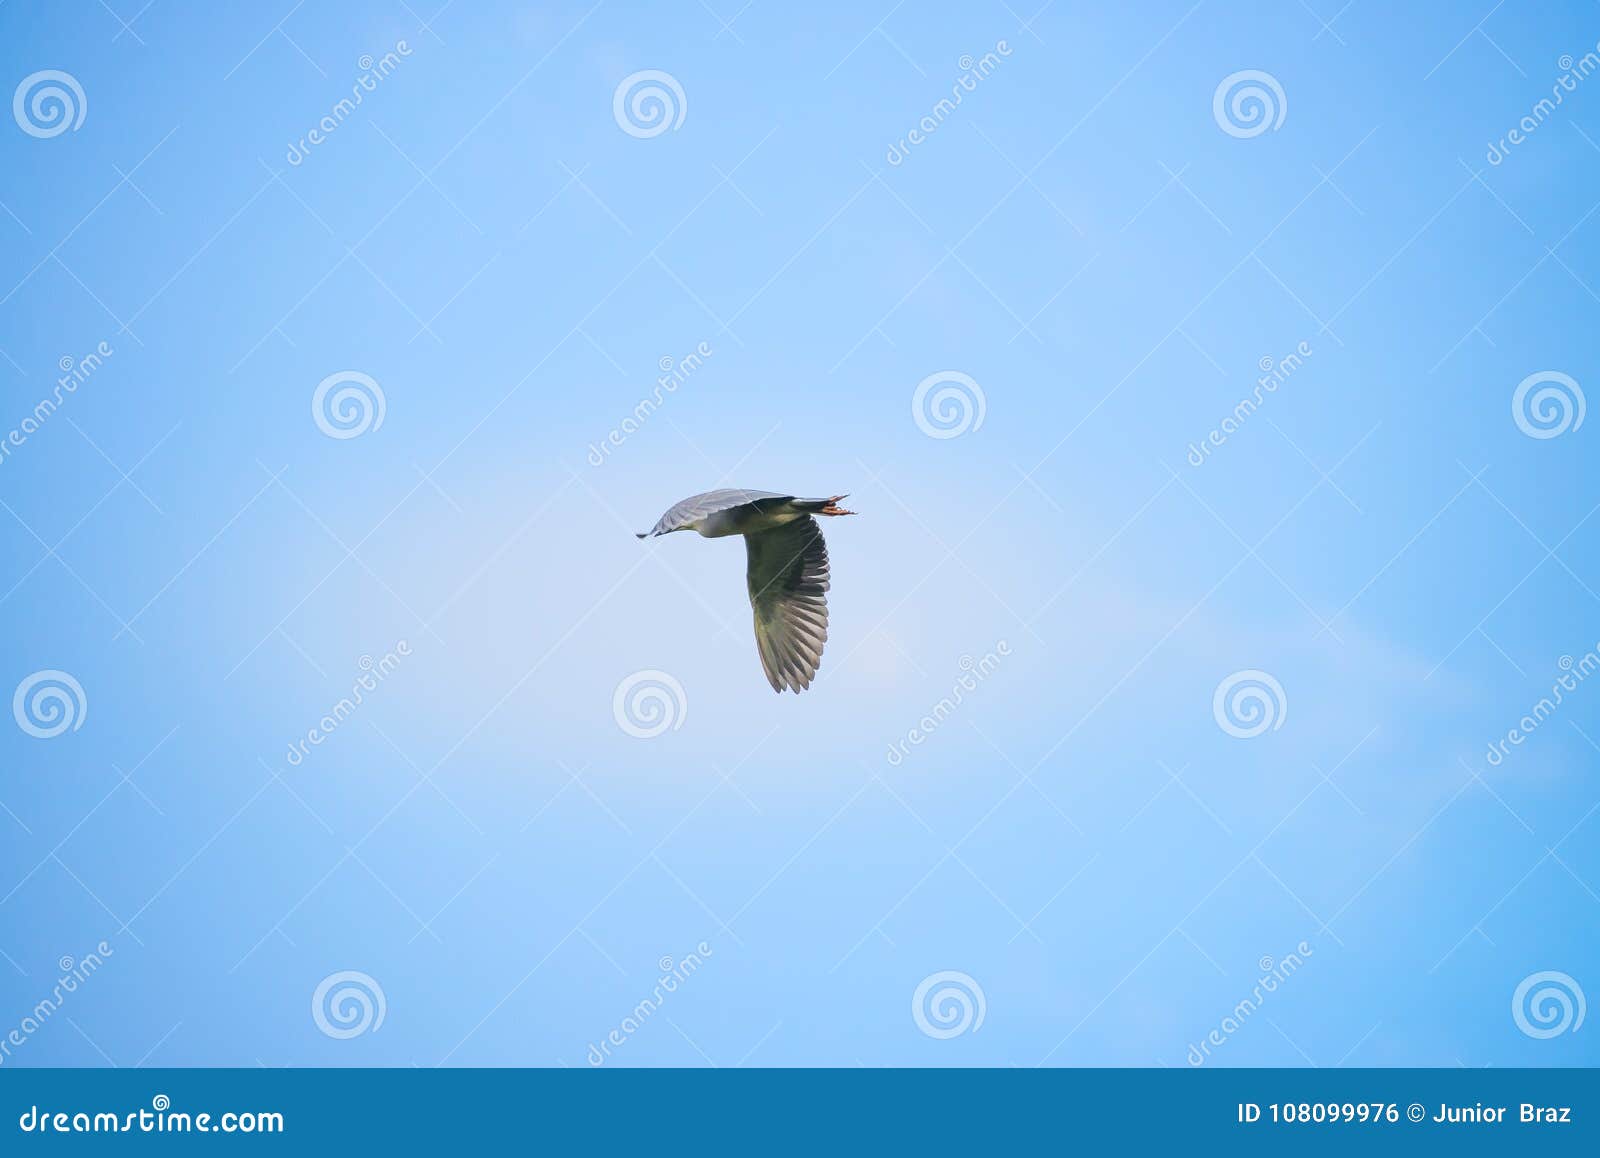 black crowned bird flying with sky as background